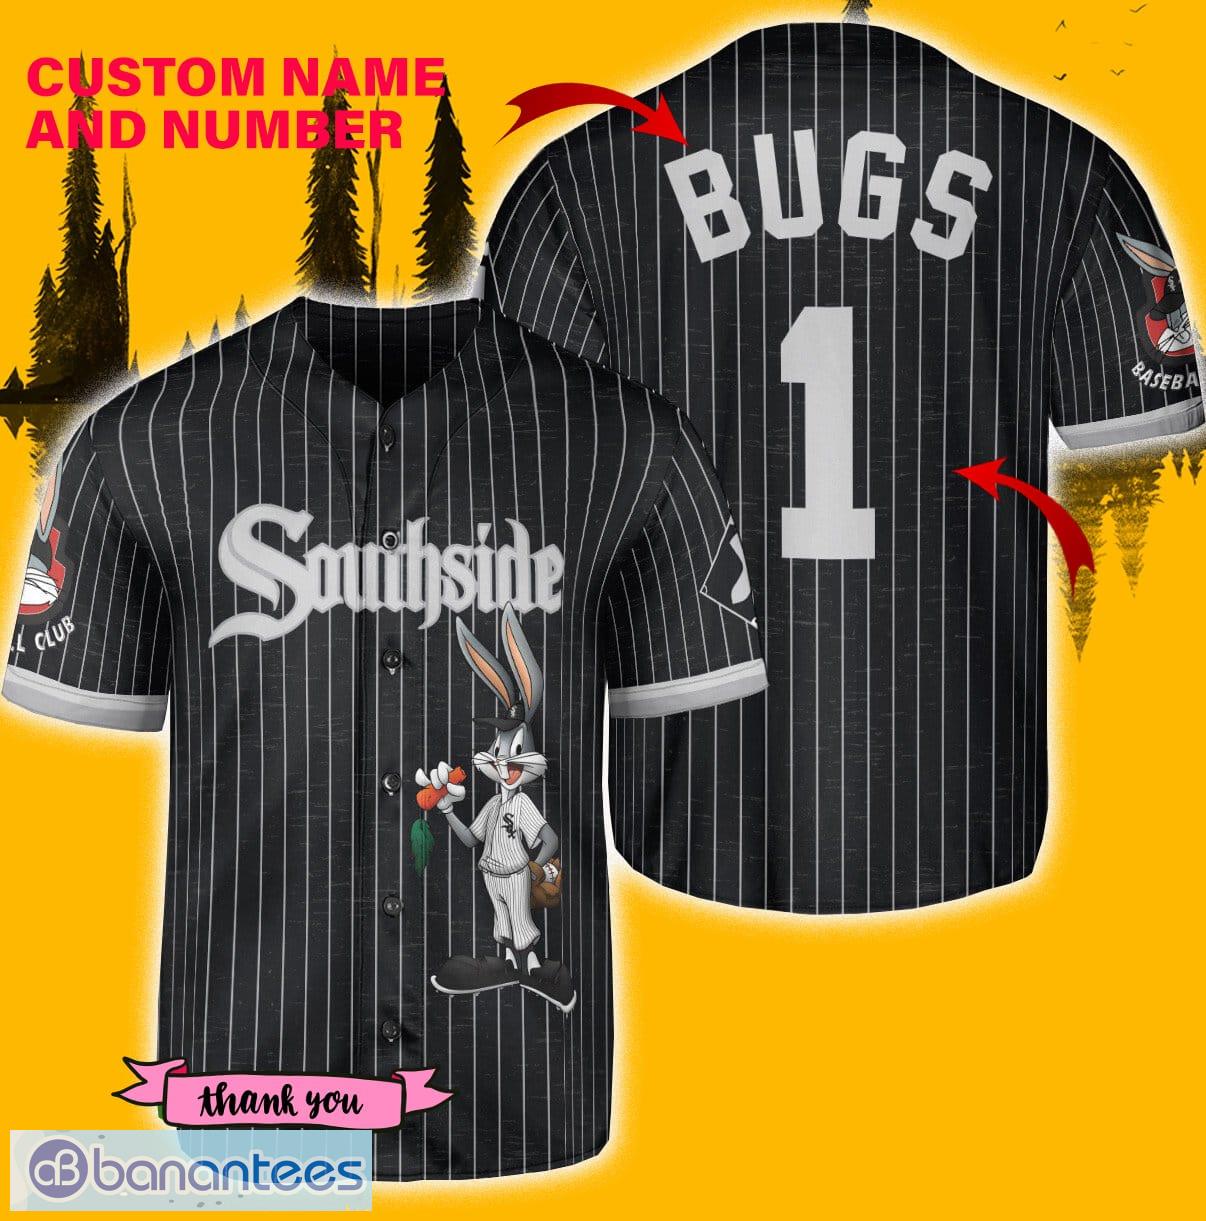 Customize Royals Jersey w/ Bugs Bunny | White